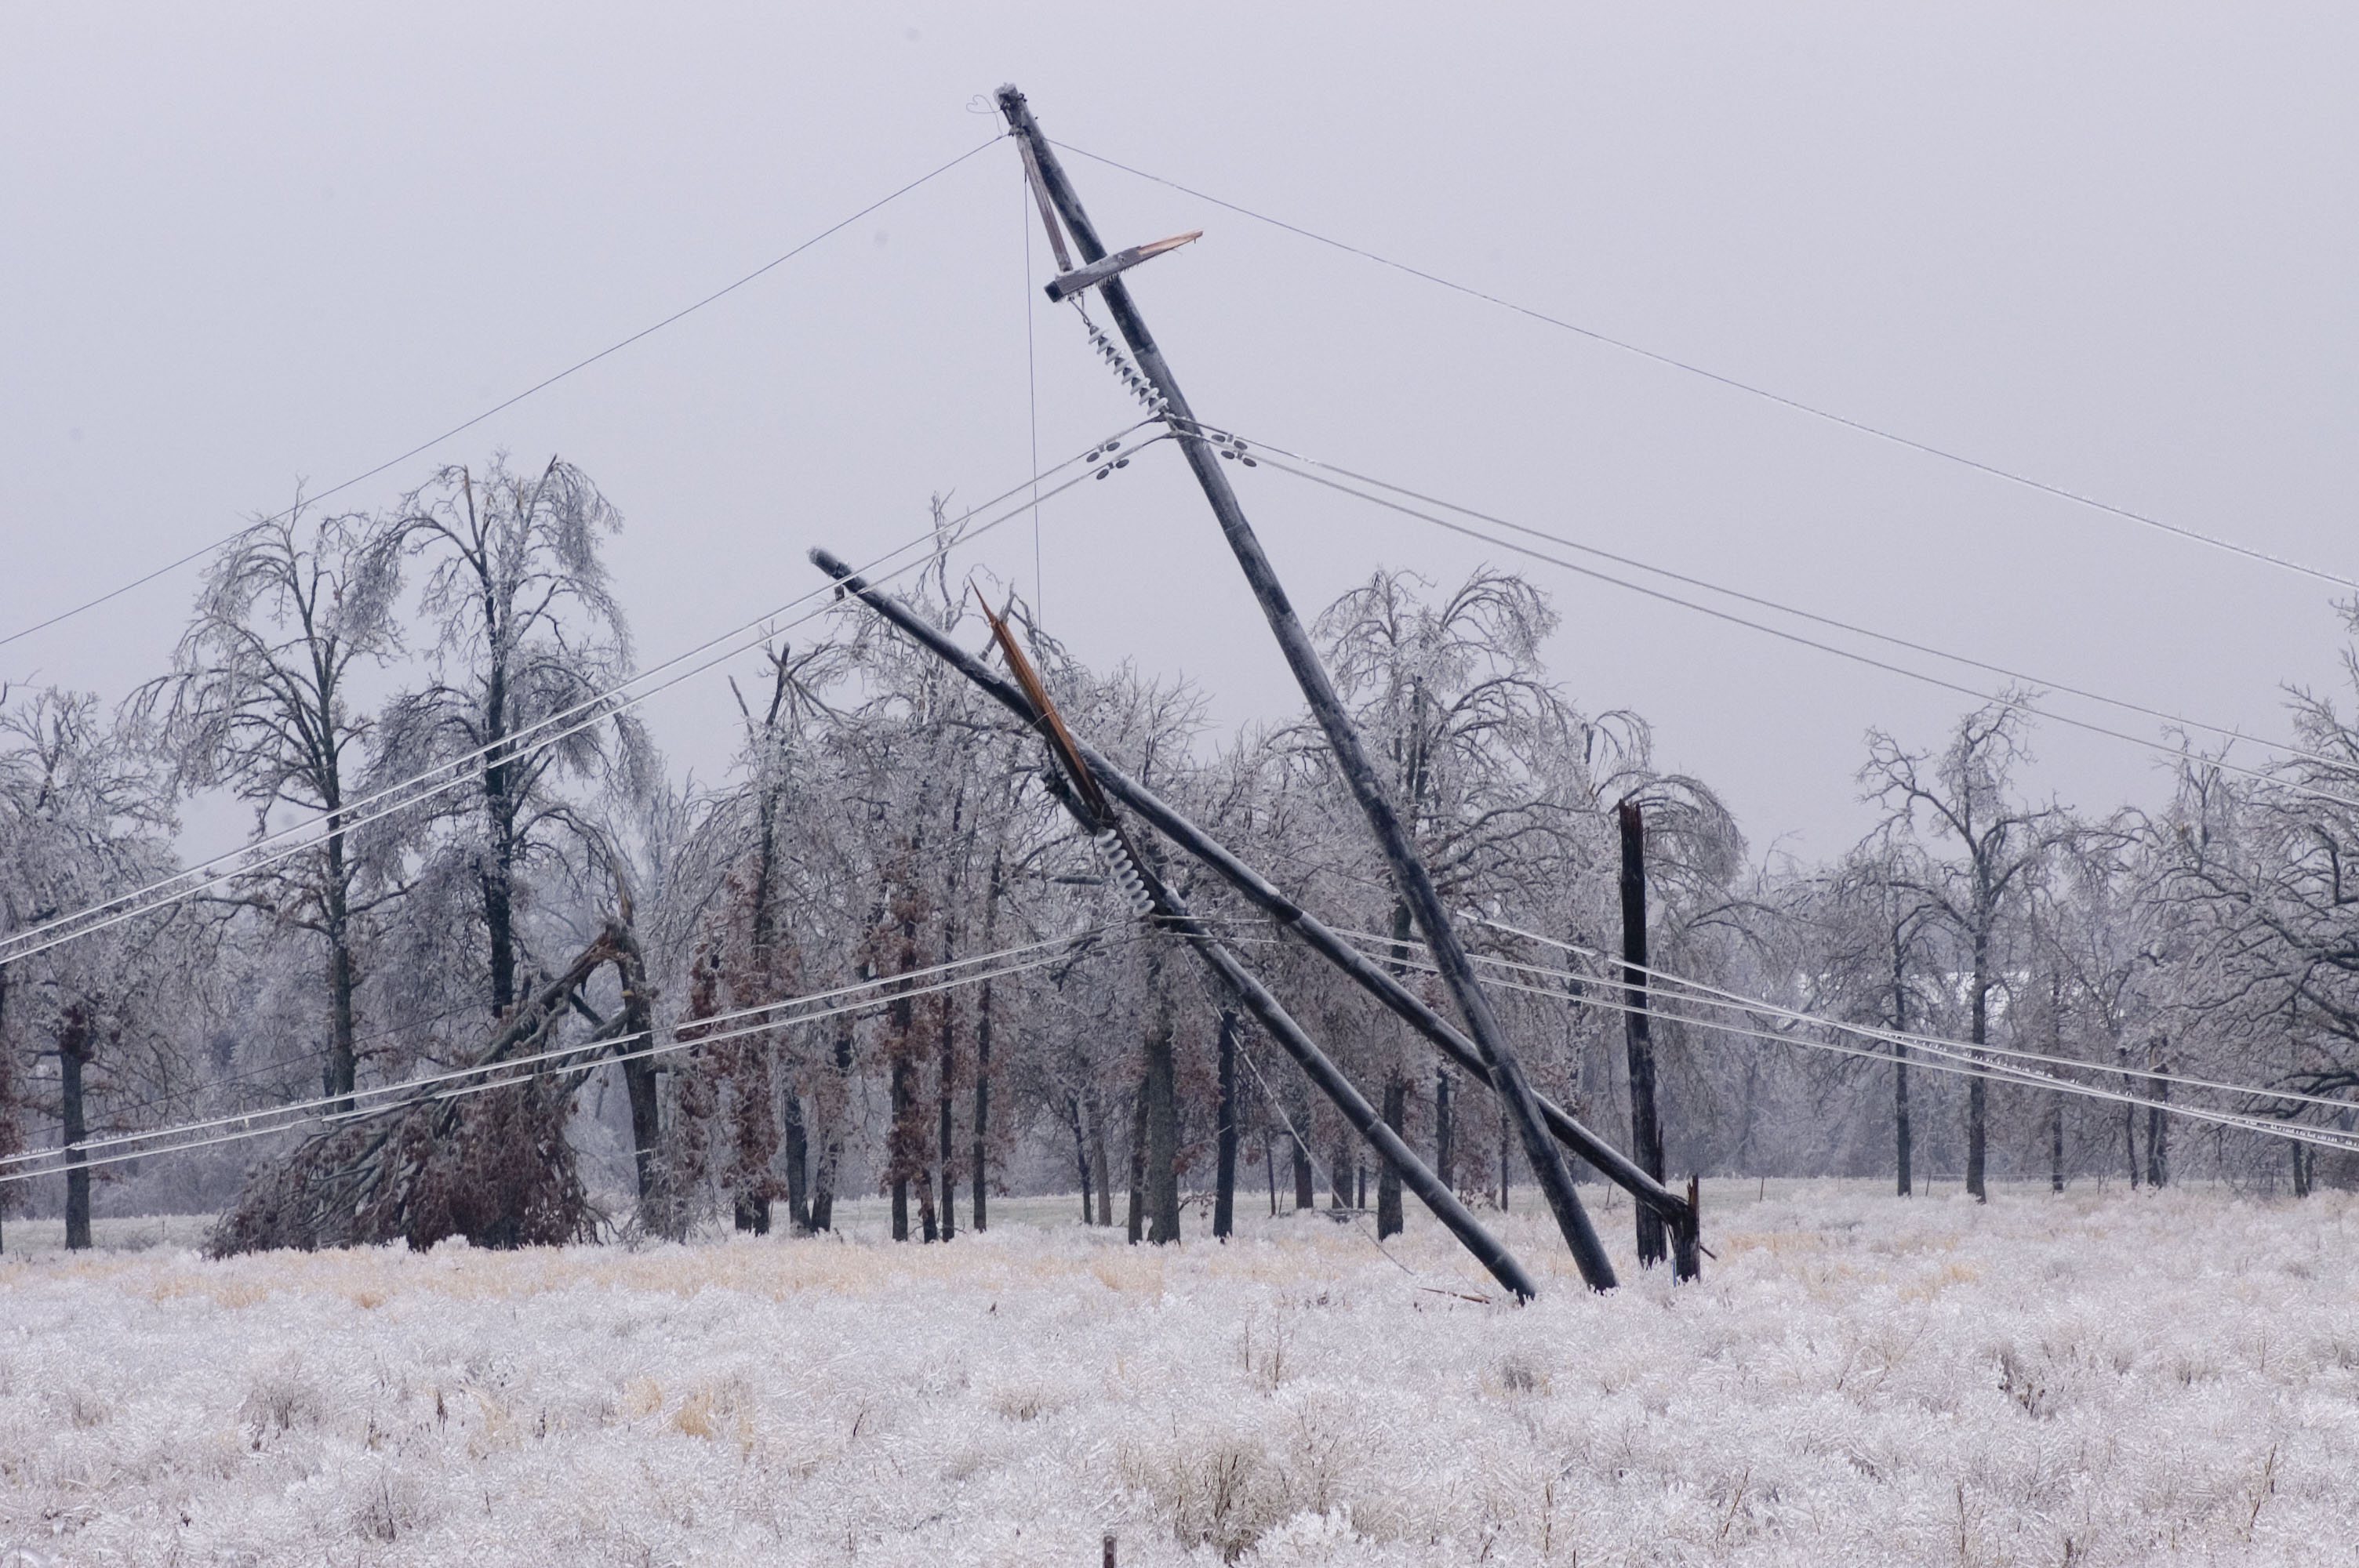 downed power line in winter